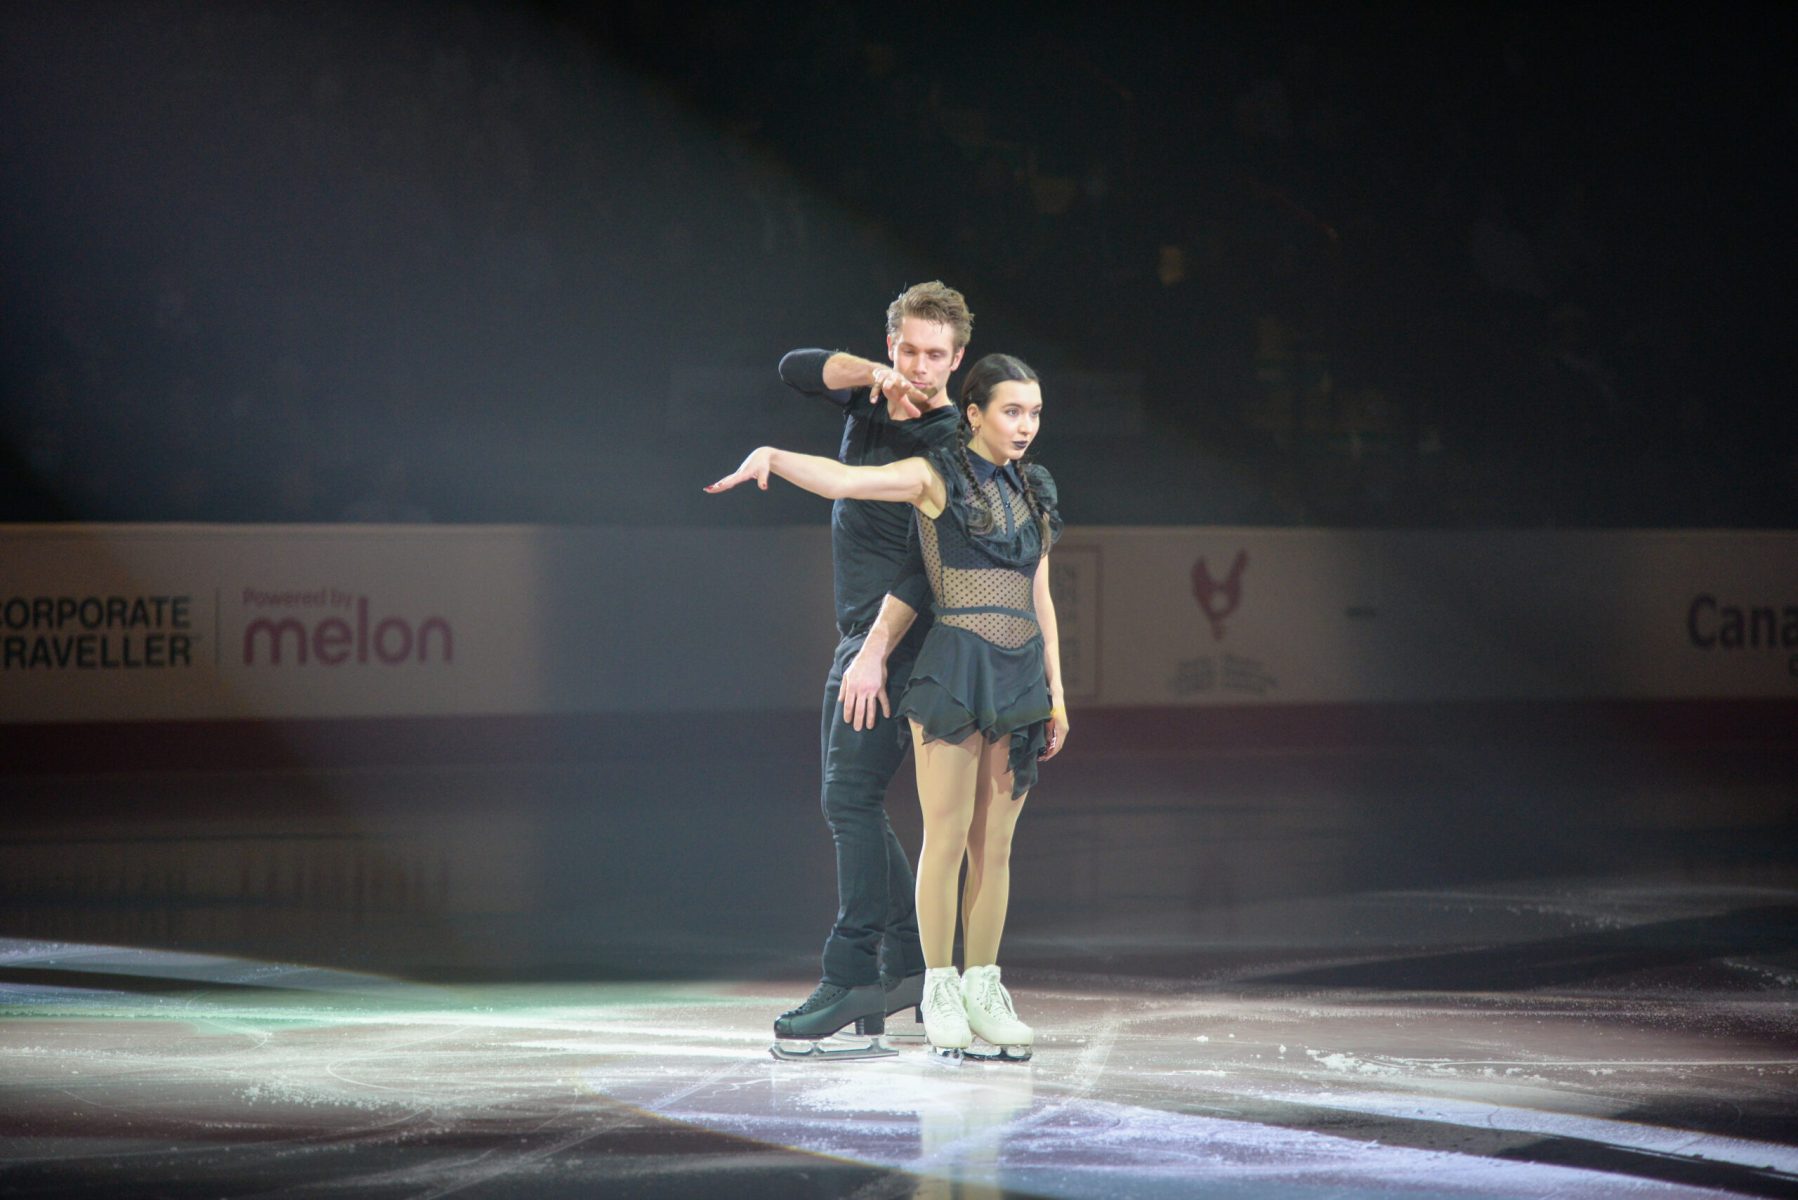 Bronze Medalist Lia Pereira / Trennt Michaud skated to their gala program, Wednesday, for the Canadian nationals in Oshawa.